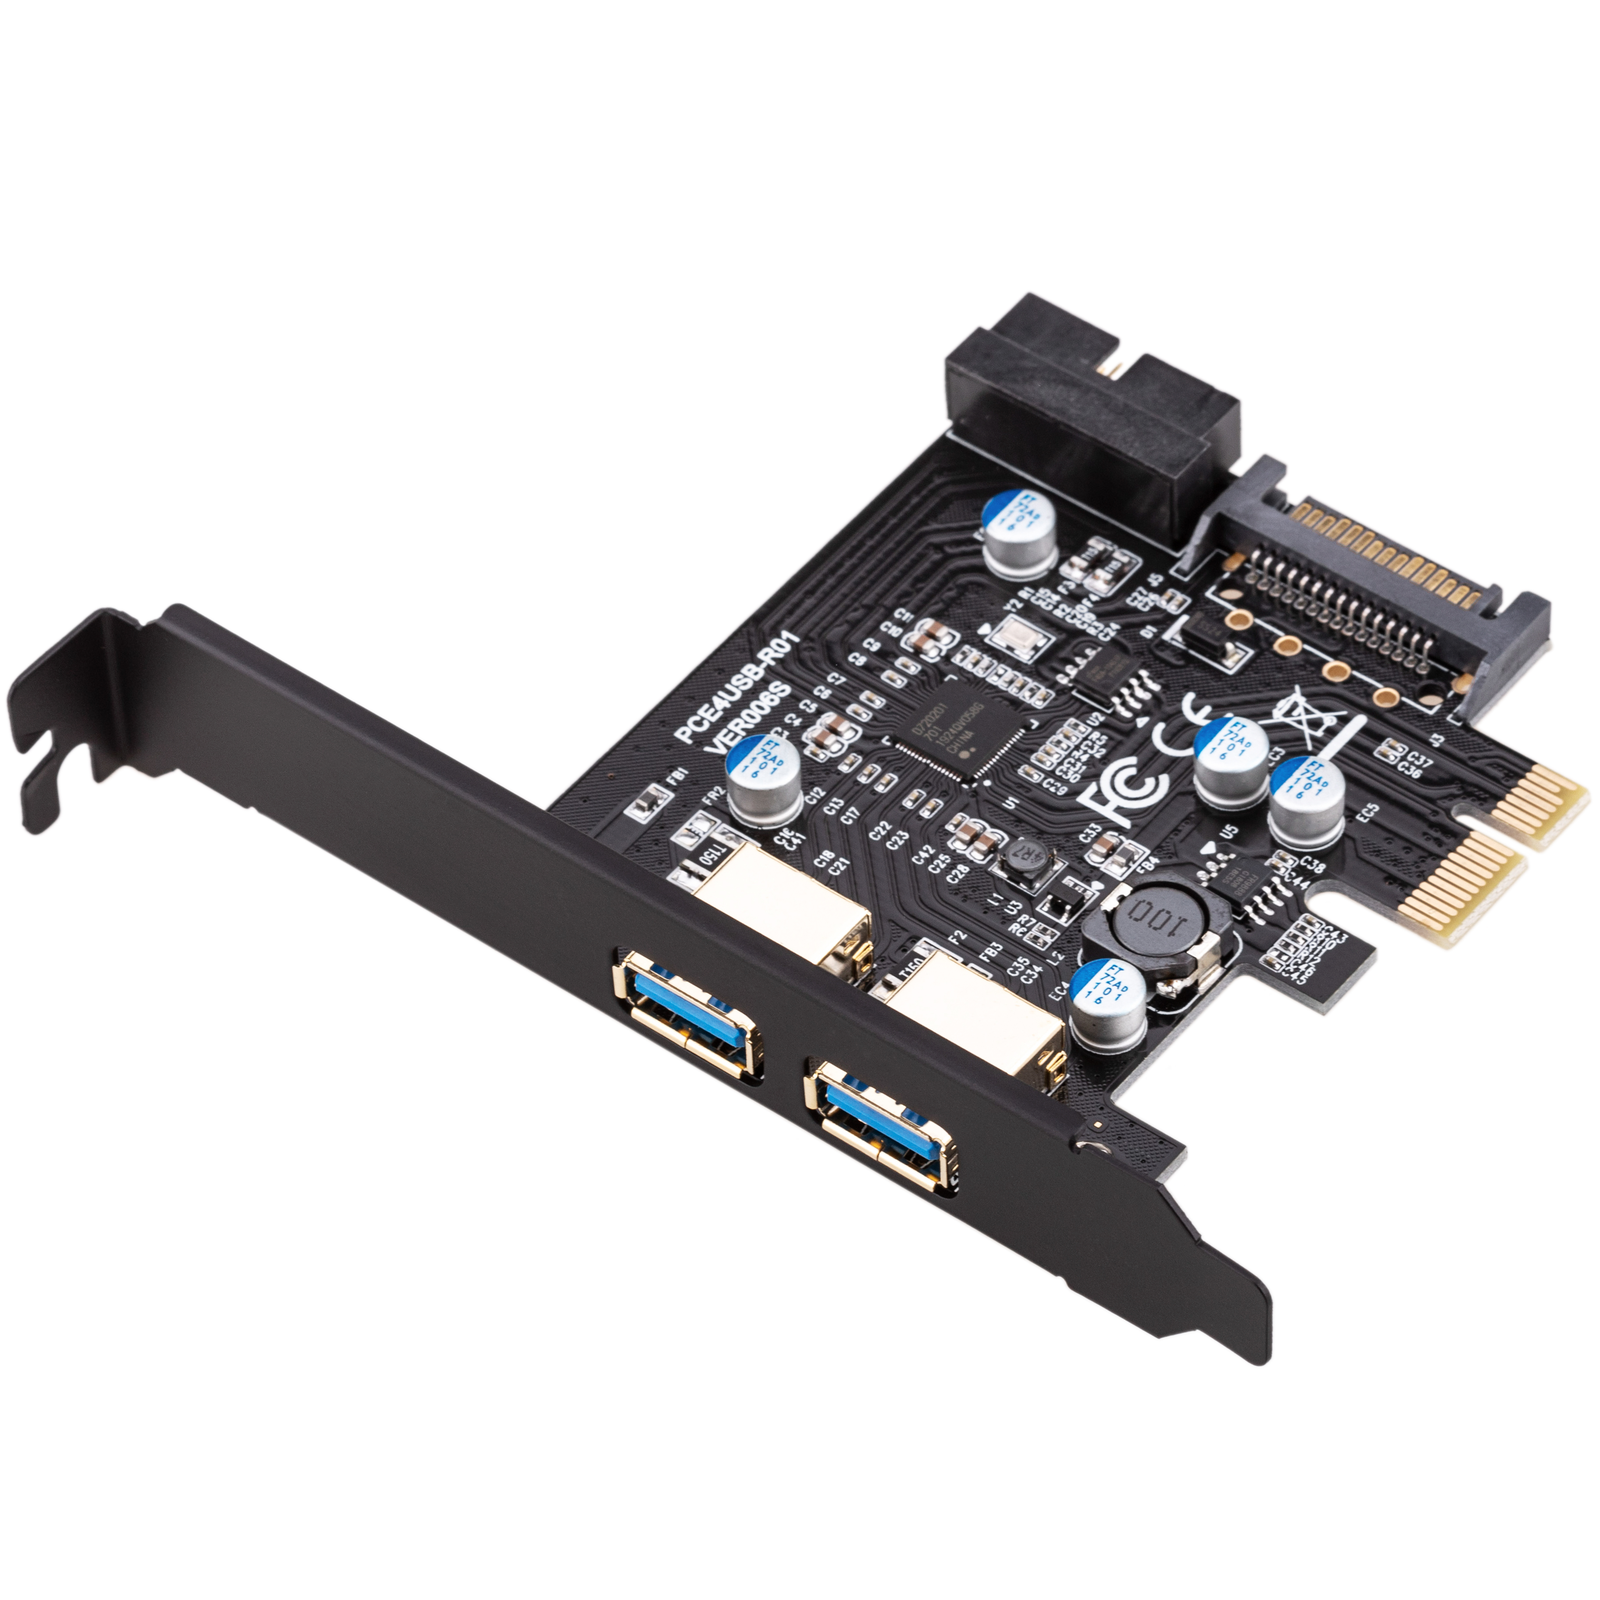 PCIe to SuperSpeed USB 3.0 card with external ports and internal 19-pin  Cablematic